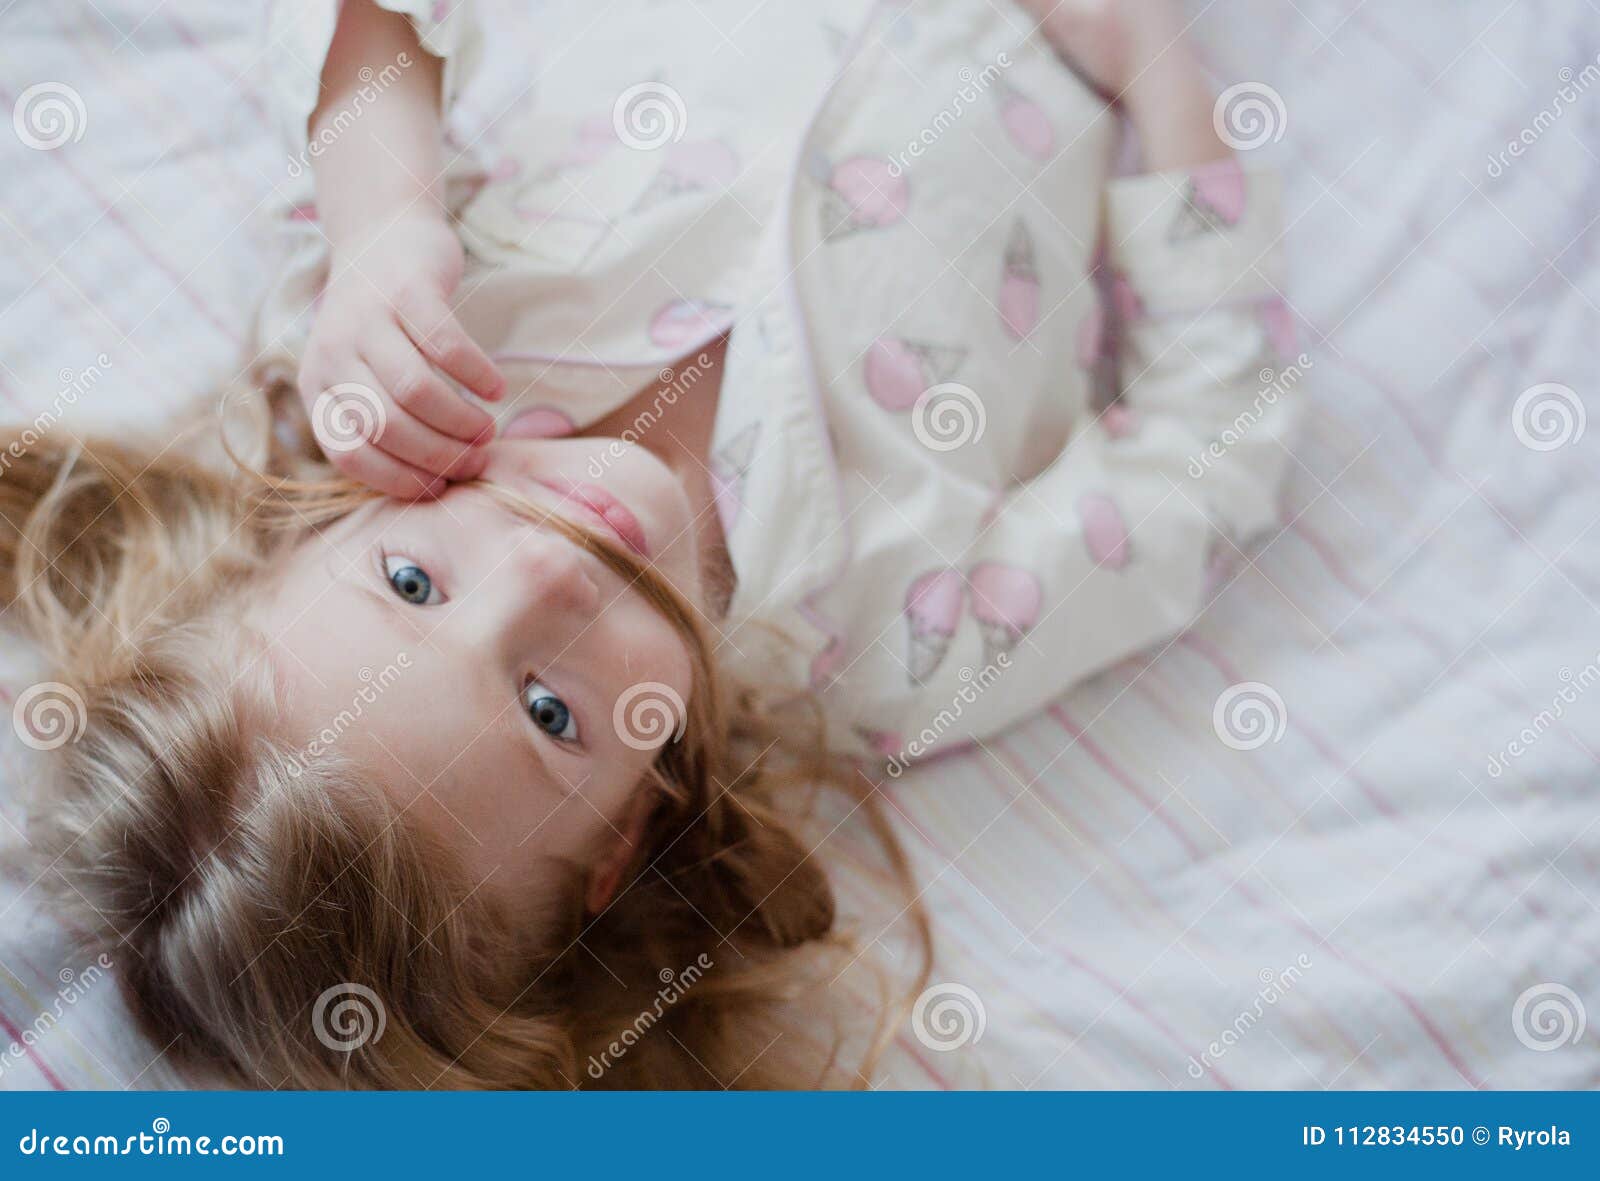 Portrait of Little Blonde Girl in Pink Pajamas Making Mustache Out